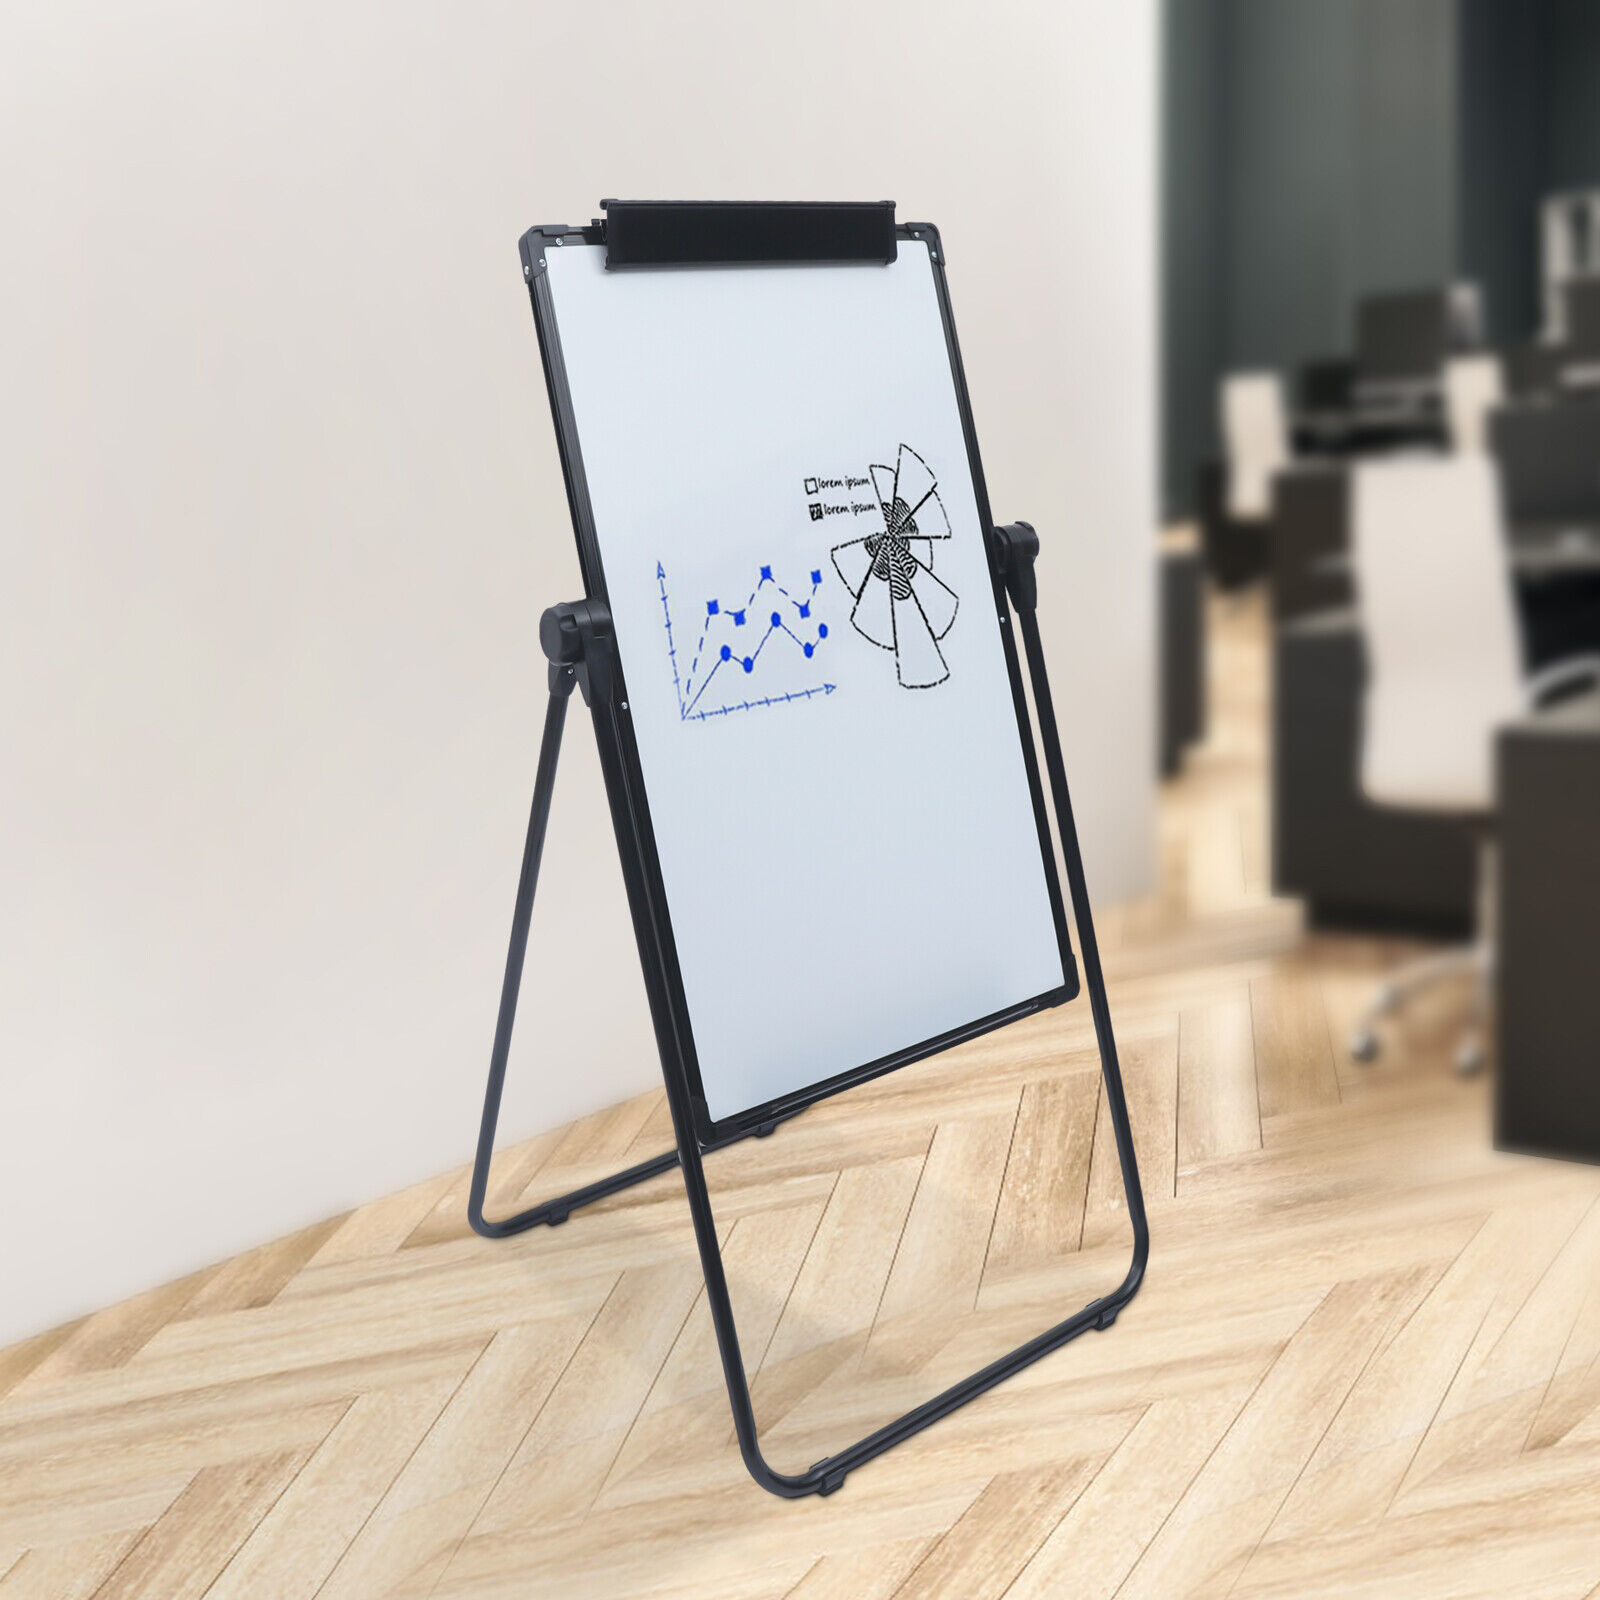 Wuzstar Dry Erase Board 24 x 35 Portable Double Sided Magnetic White Board  with Writing Set Height Adjustable White Board Easel